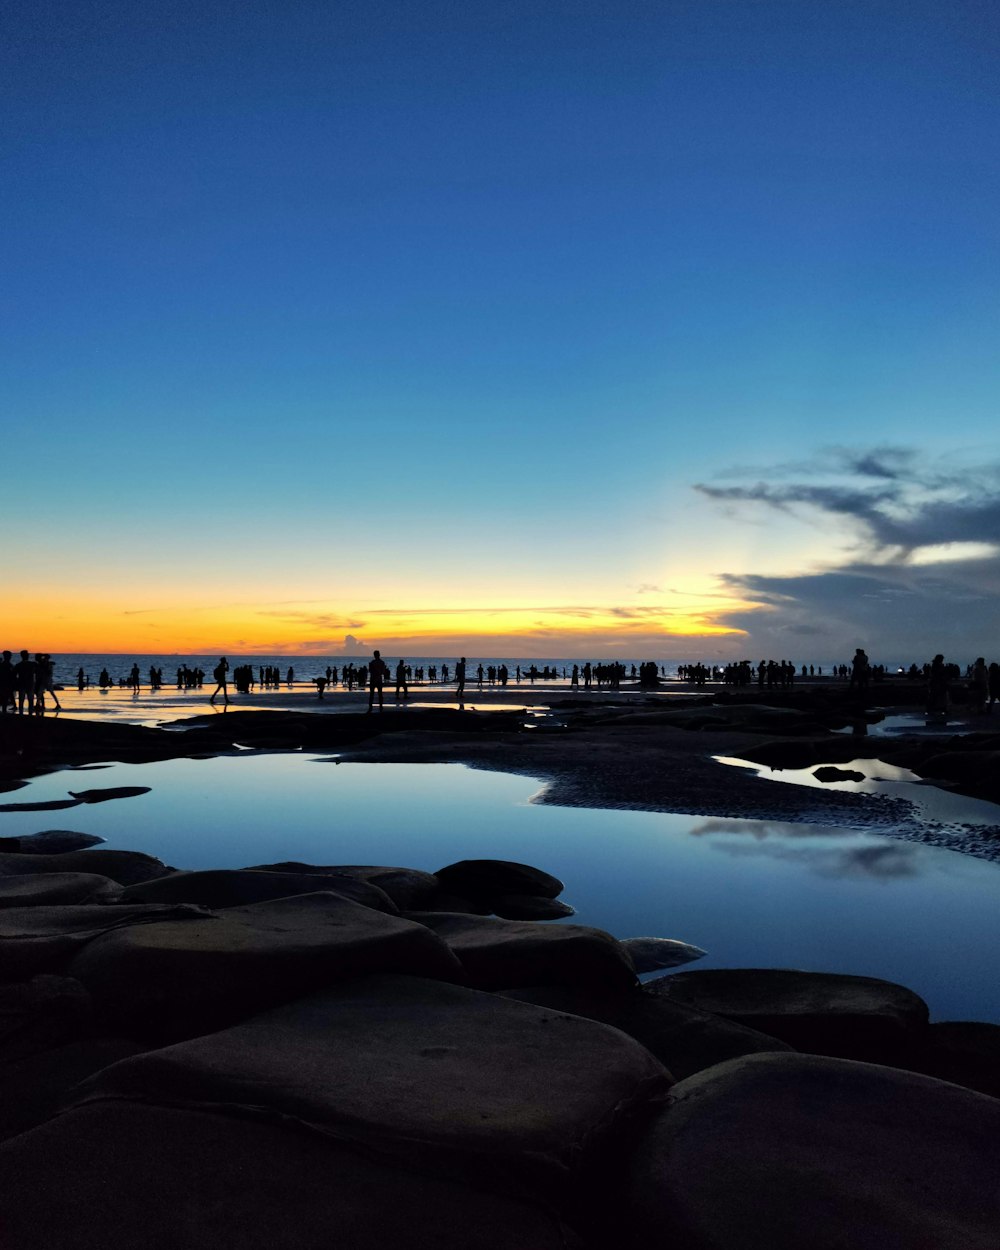 a body of water surrounded by rocks at sunset